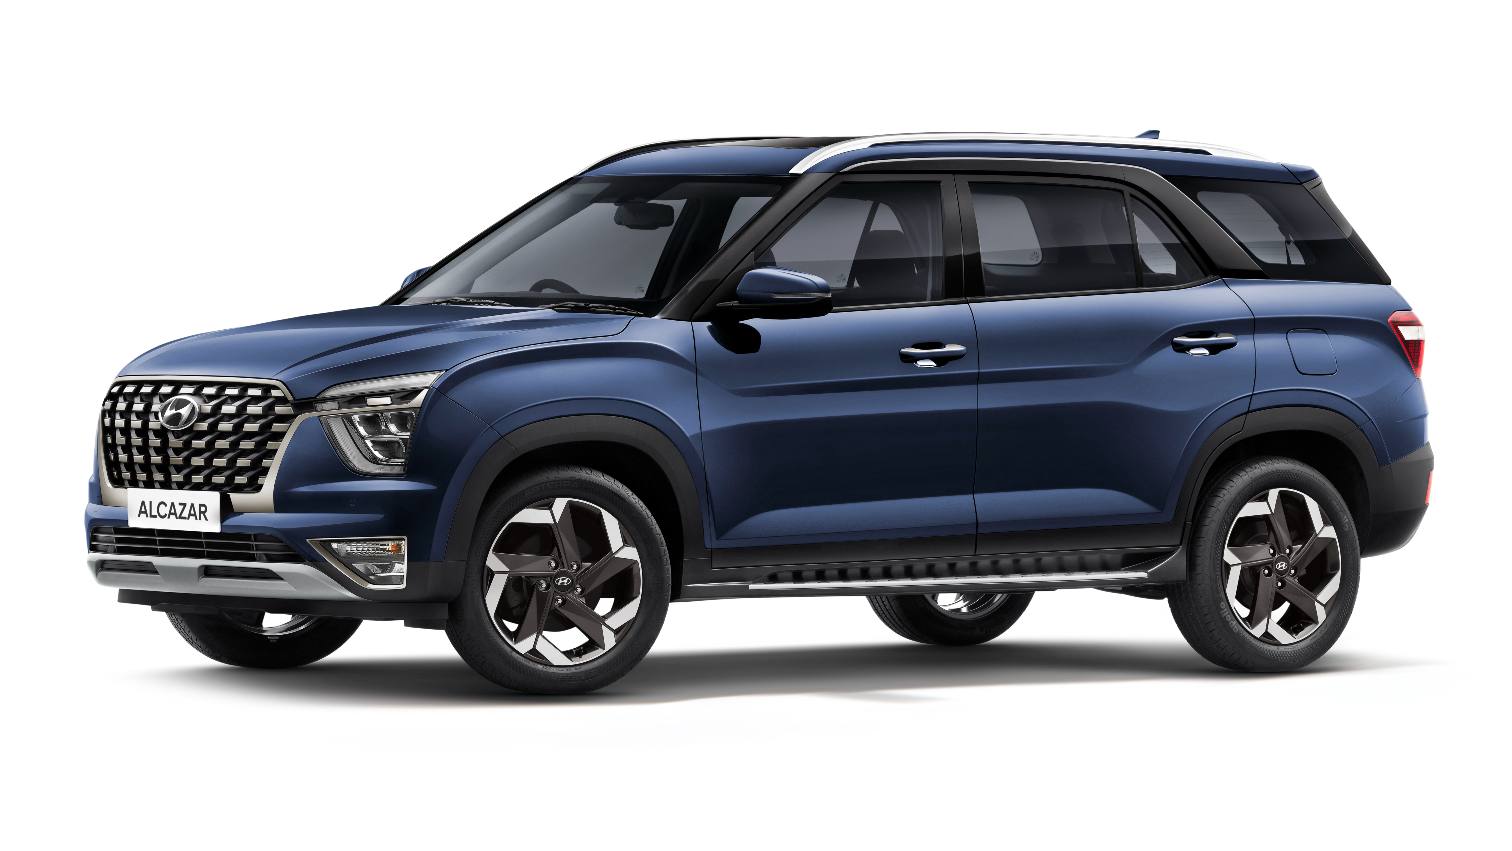 For just a small premium over the price of the Kushaq DSG, one can buy the entry-level Hyundai Alcazar, a substantially larger three-row SUV. Image: Hyundai